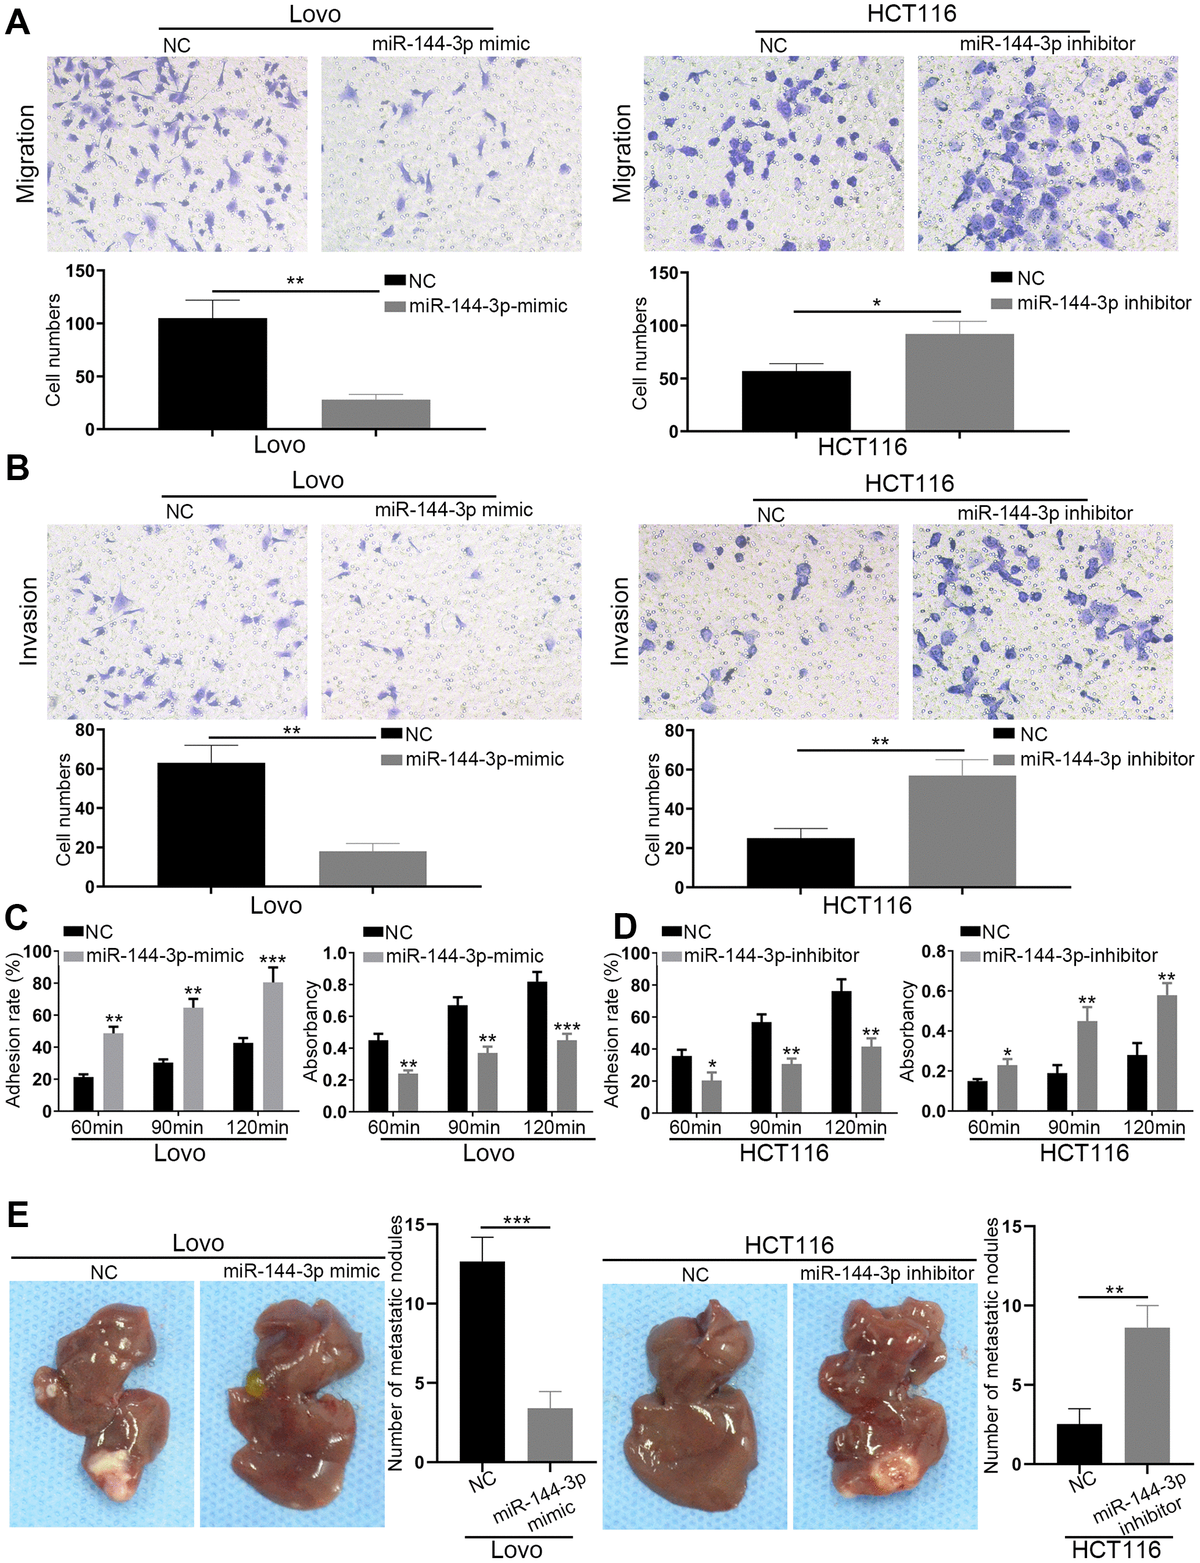 miR-144-3p inhibited CRA cell migration, invasion and tumor metastasis. (A) Transwell migration assay of migratory ability of Lovo cells transfected with miR-144-3p mimic and HCT116 cells transfected with miR-144-3p inhibitor. (B) Transwell invasion assay of invasive ability of Lovo cells transfected with miR-144-3p mimic and HCT116 cells transfected with miR-144-3p inhibitor. (C) Overexpression of miR-144-3p in Lovo cells significantly enhanced cell-cell adhesion and decreased cell-ECM adhesion. (D) Knockdown of miR-144-3p in HCT116 cells significantly inhibited cell-cell adhesion and increased the cell-ECM adhesion. (E) In vivo metastatic assays by splenic injection showed that miR-144-3p inhibited CRA liver metastasis. The number of liver metastatic nodules from mice with inoculation of LovomiR-144-3p mimic cells was significantly smaller than that from mice with inoculation of control cells, whereas the number of liver metastatic nodules from mice with inoculation of HCT116miR-144-3p inhibitor cells was significantly larger than that from mice with inoculation of control cells. ECM, extracellular matrix. *, PPP 